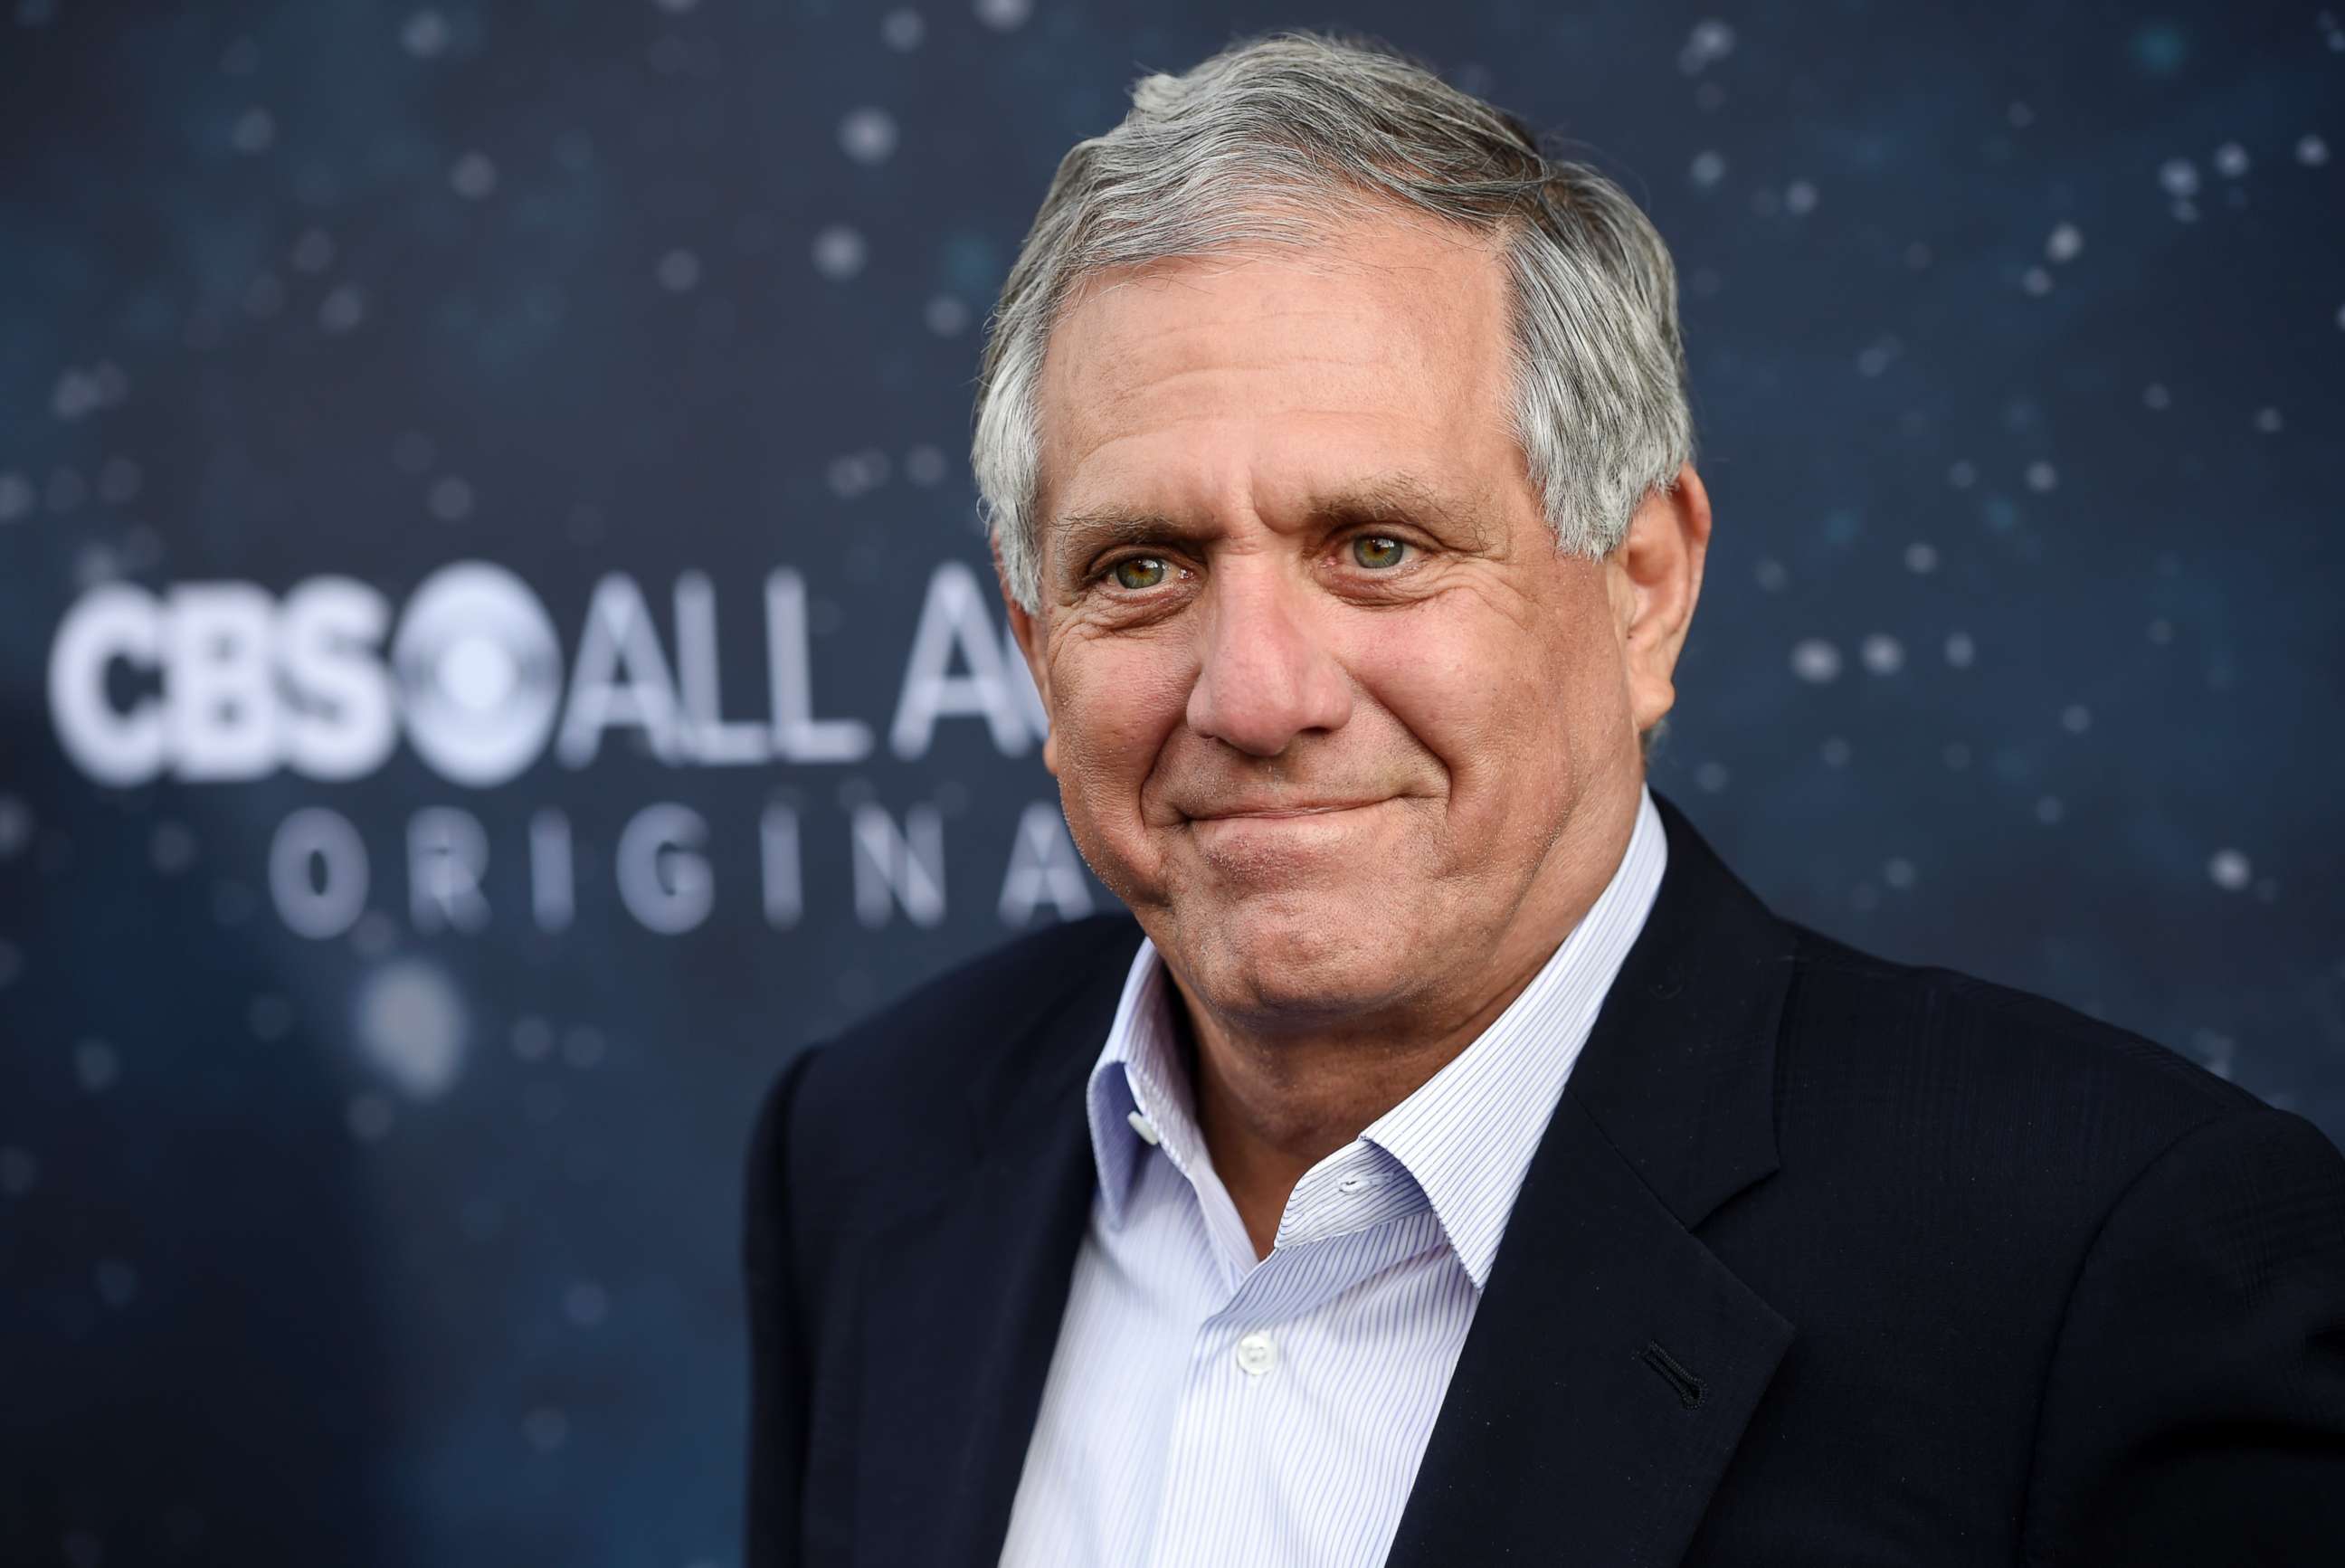 PHOTO: Les Moonves, chairman and CEO of CBS Corporation, poses at the premiere of the new television series "Star Trek: Discovery" in Los Angeles, Sept. 19, 2017.